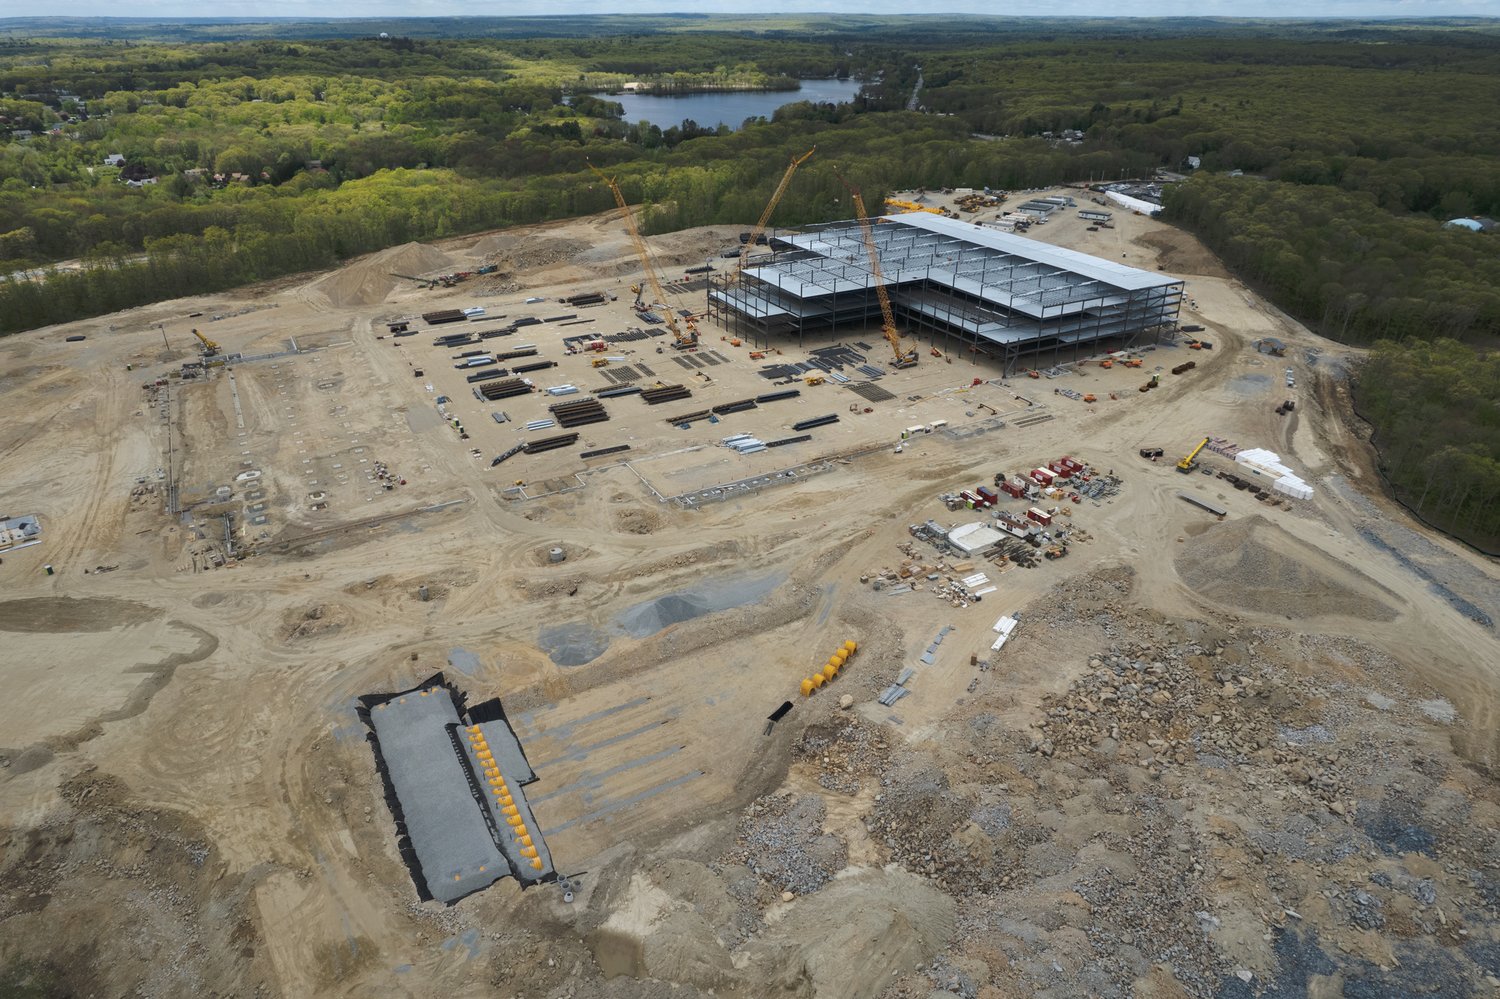 FROM THE AIR: These images of the Amazon construction site in Johnston were captured by drones piloted by Trevor Bryan, an FAA Licensed and insured drone pilot, the owner and operator of New England Aerial Services, on May 15. For more information on the Warwick-based company, visit their Facebook page at www.facebook.com/newenglandaerialservices.